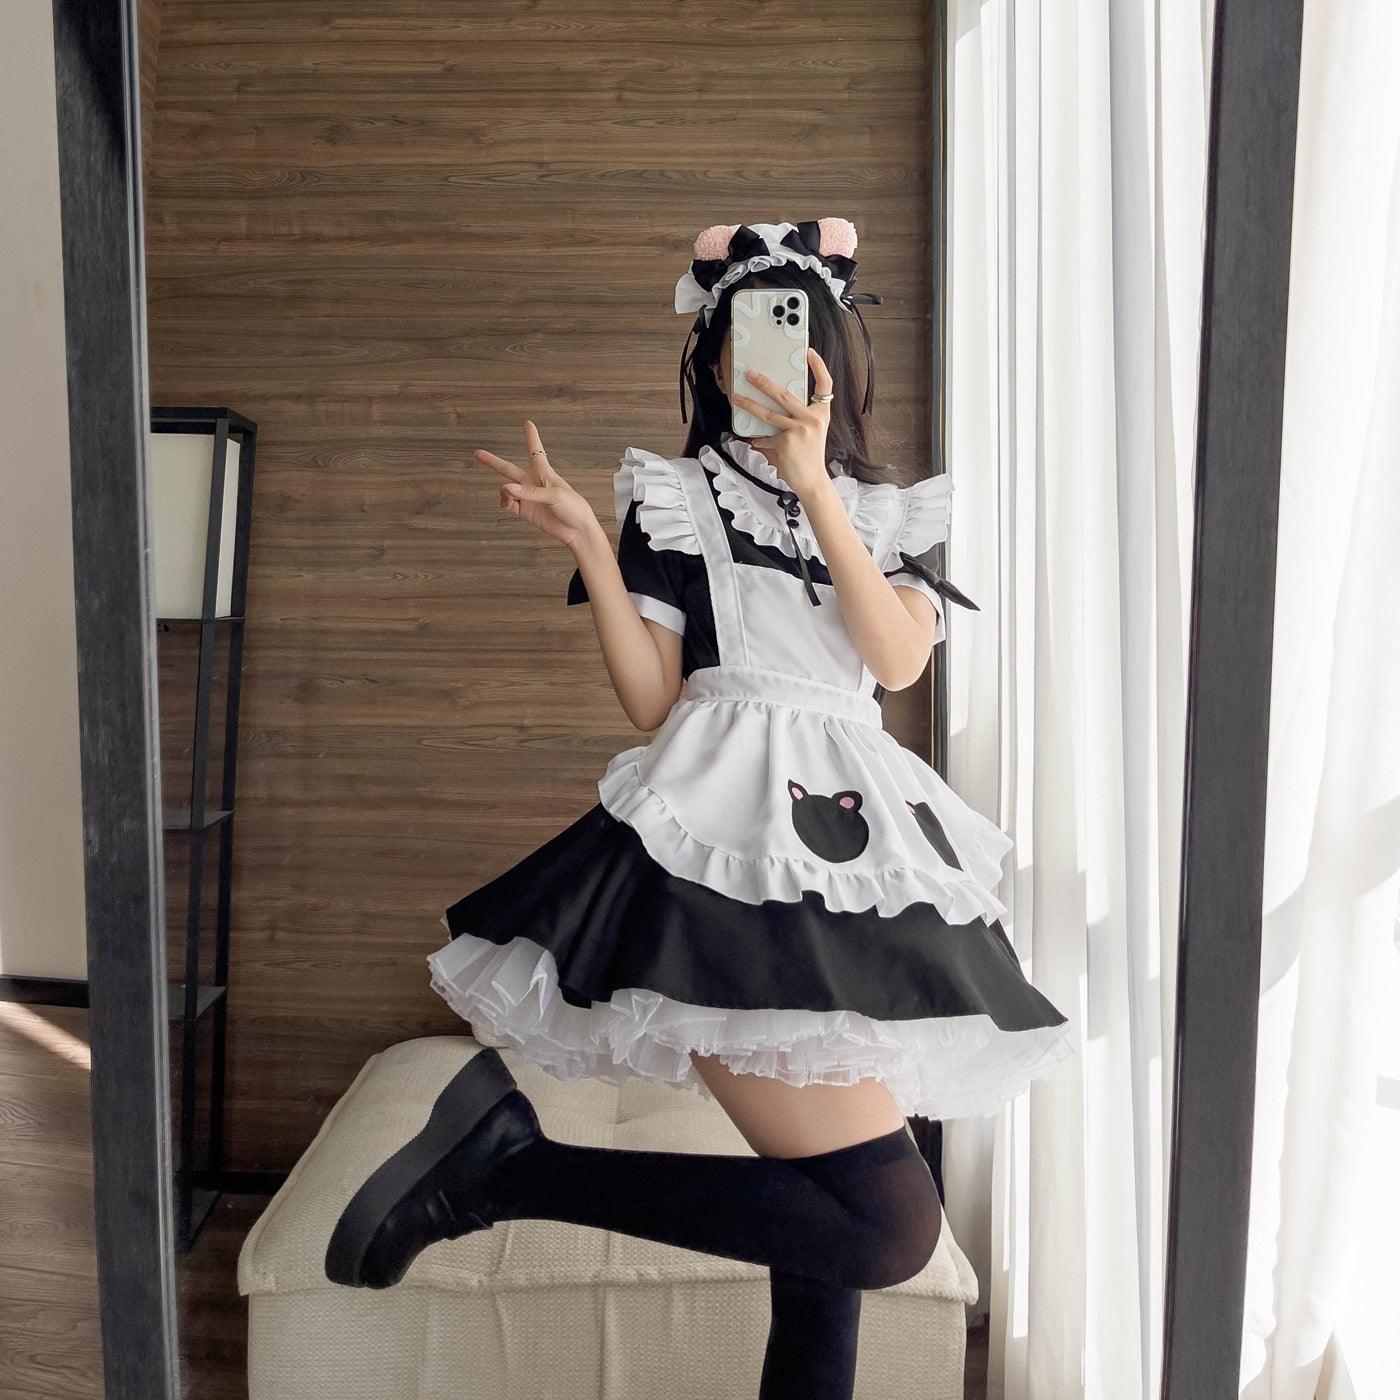 Cute Bear Waitress Maid Outfit Large Size Lolita Dress Anime Game Fancy Cosplay Costume